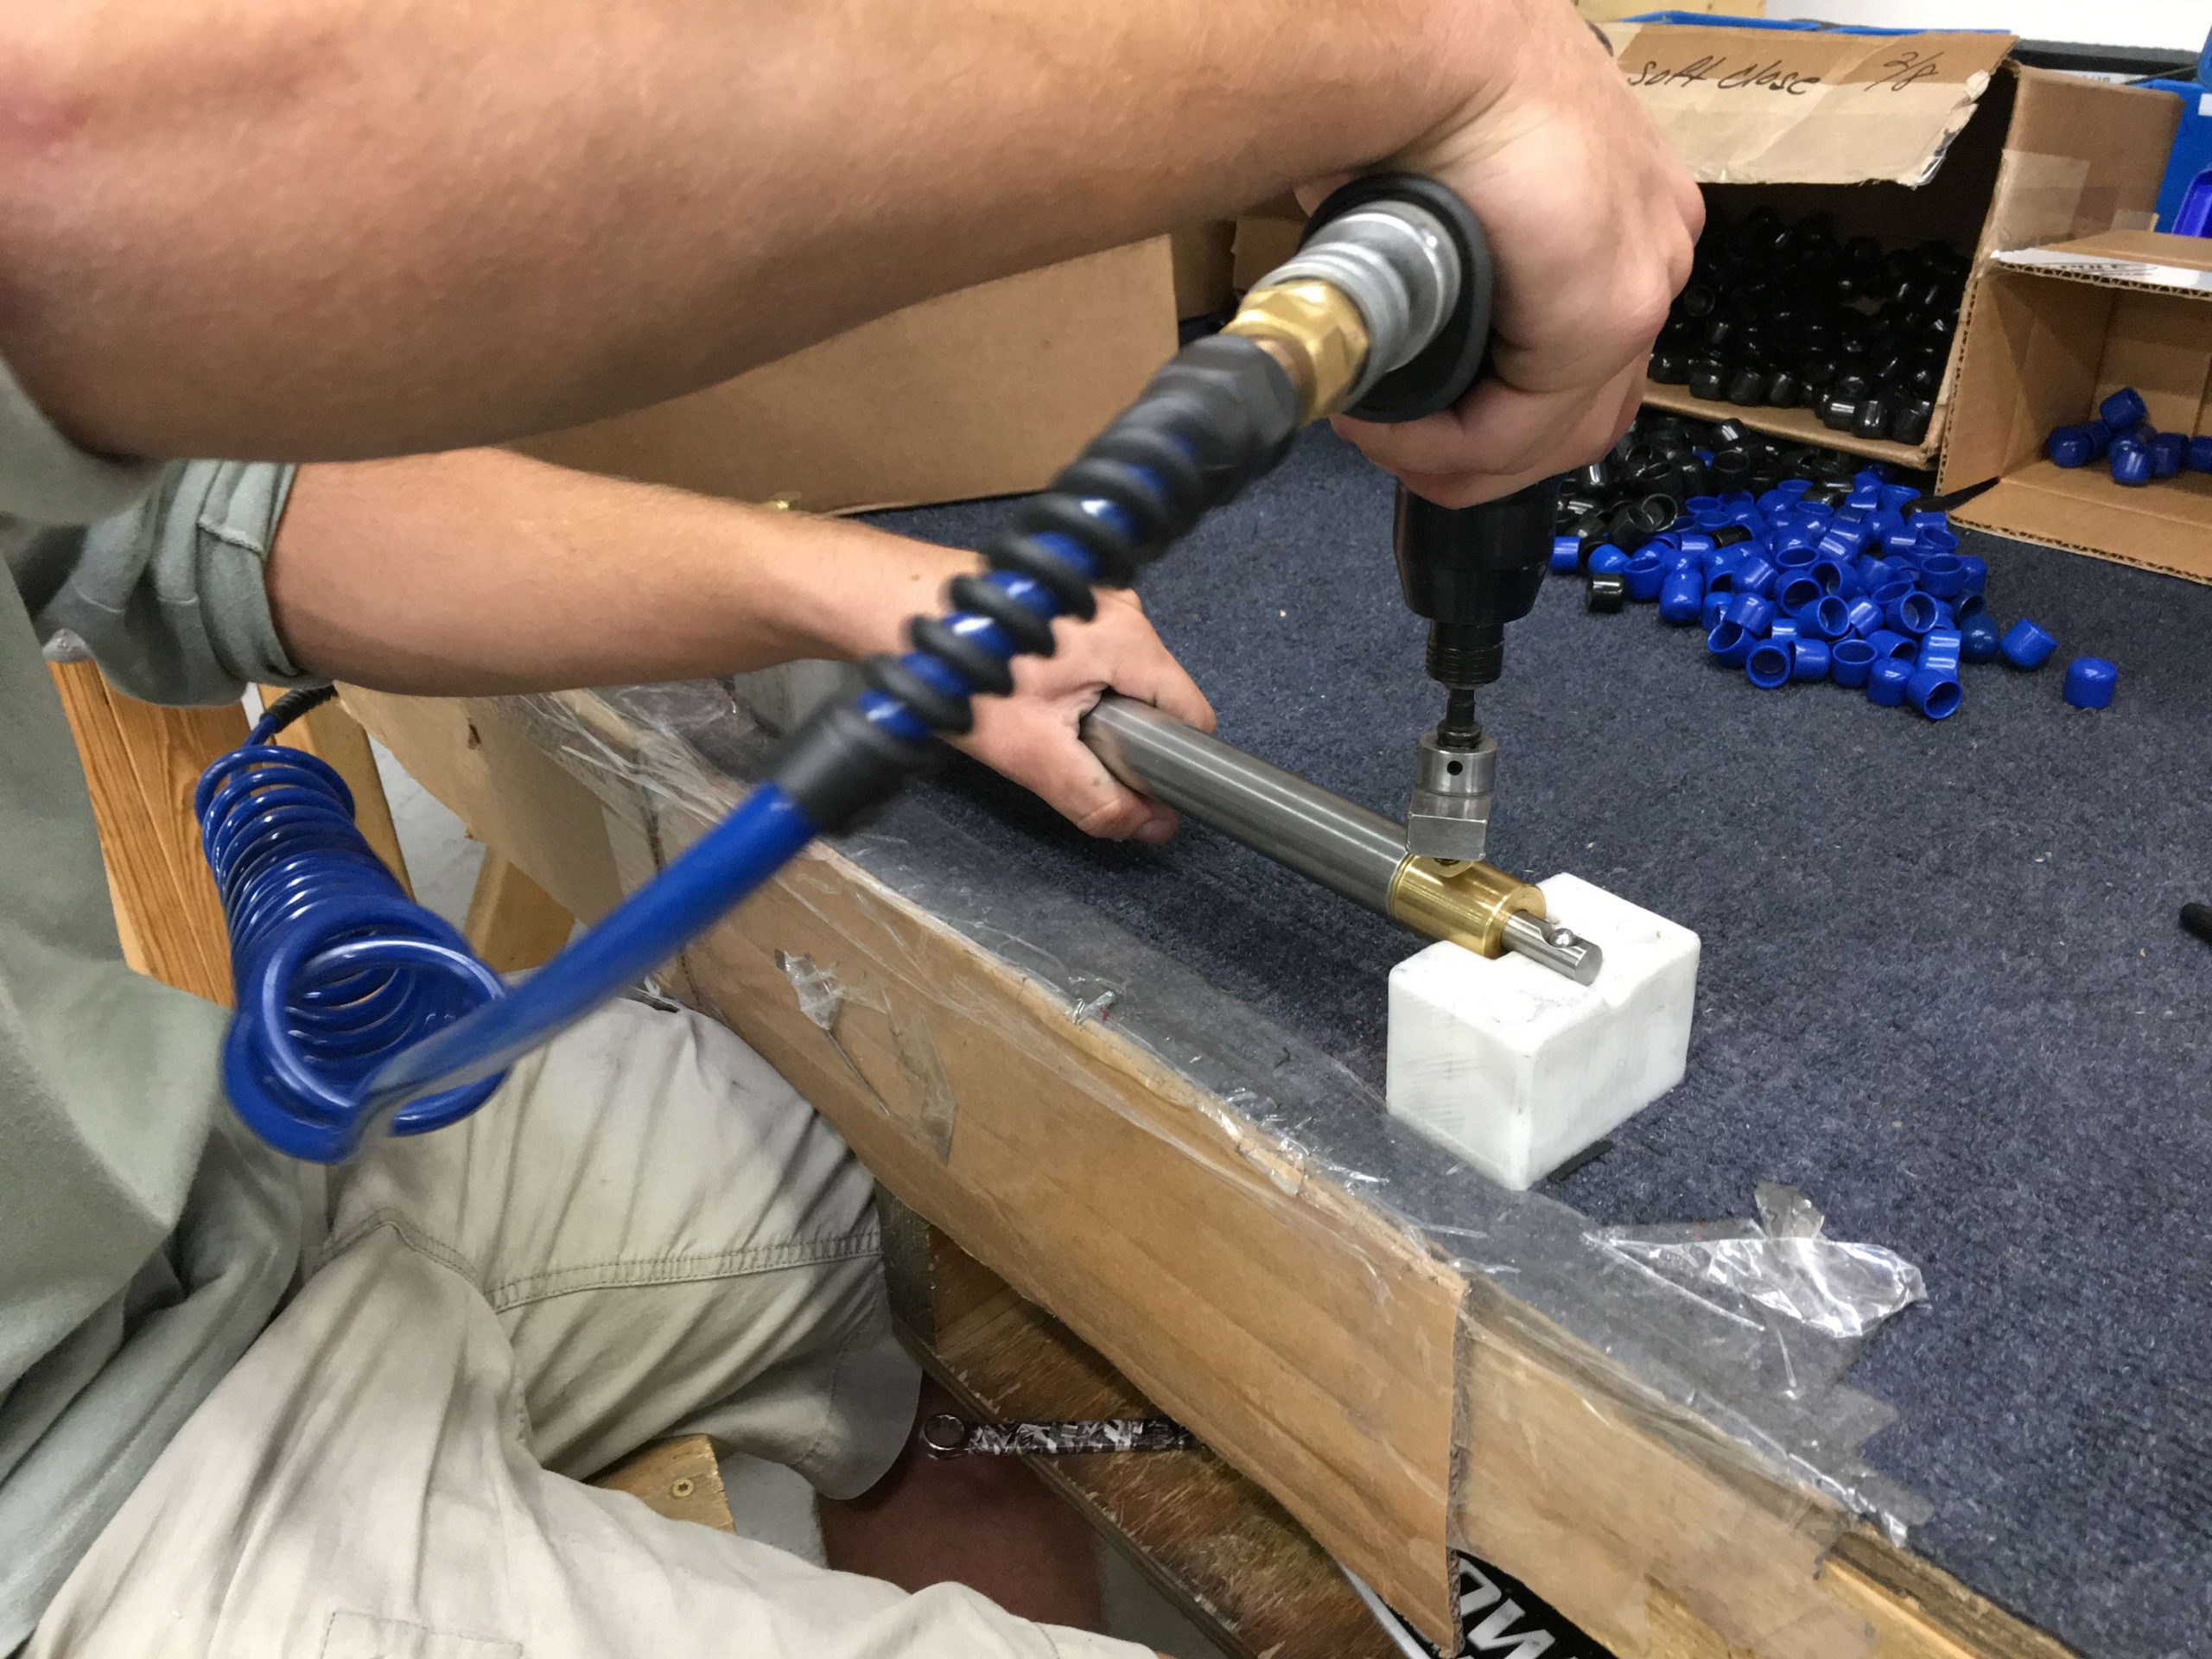 This worker is testing and attaching the fittings to the hydraulic cylinders that help the Power-Pole to extend and retract, in and out of the water.